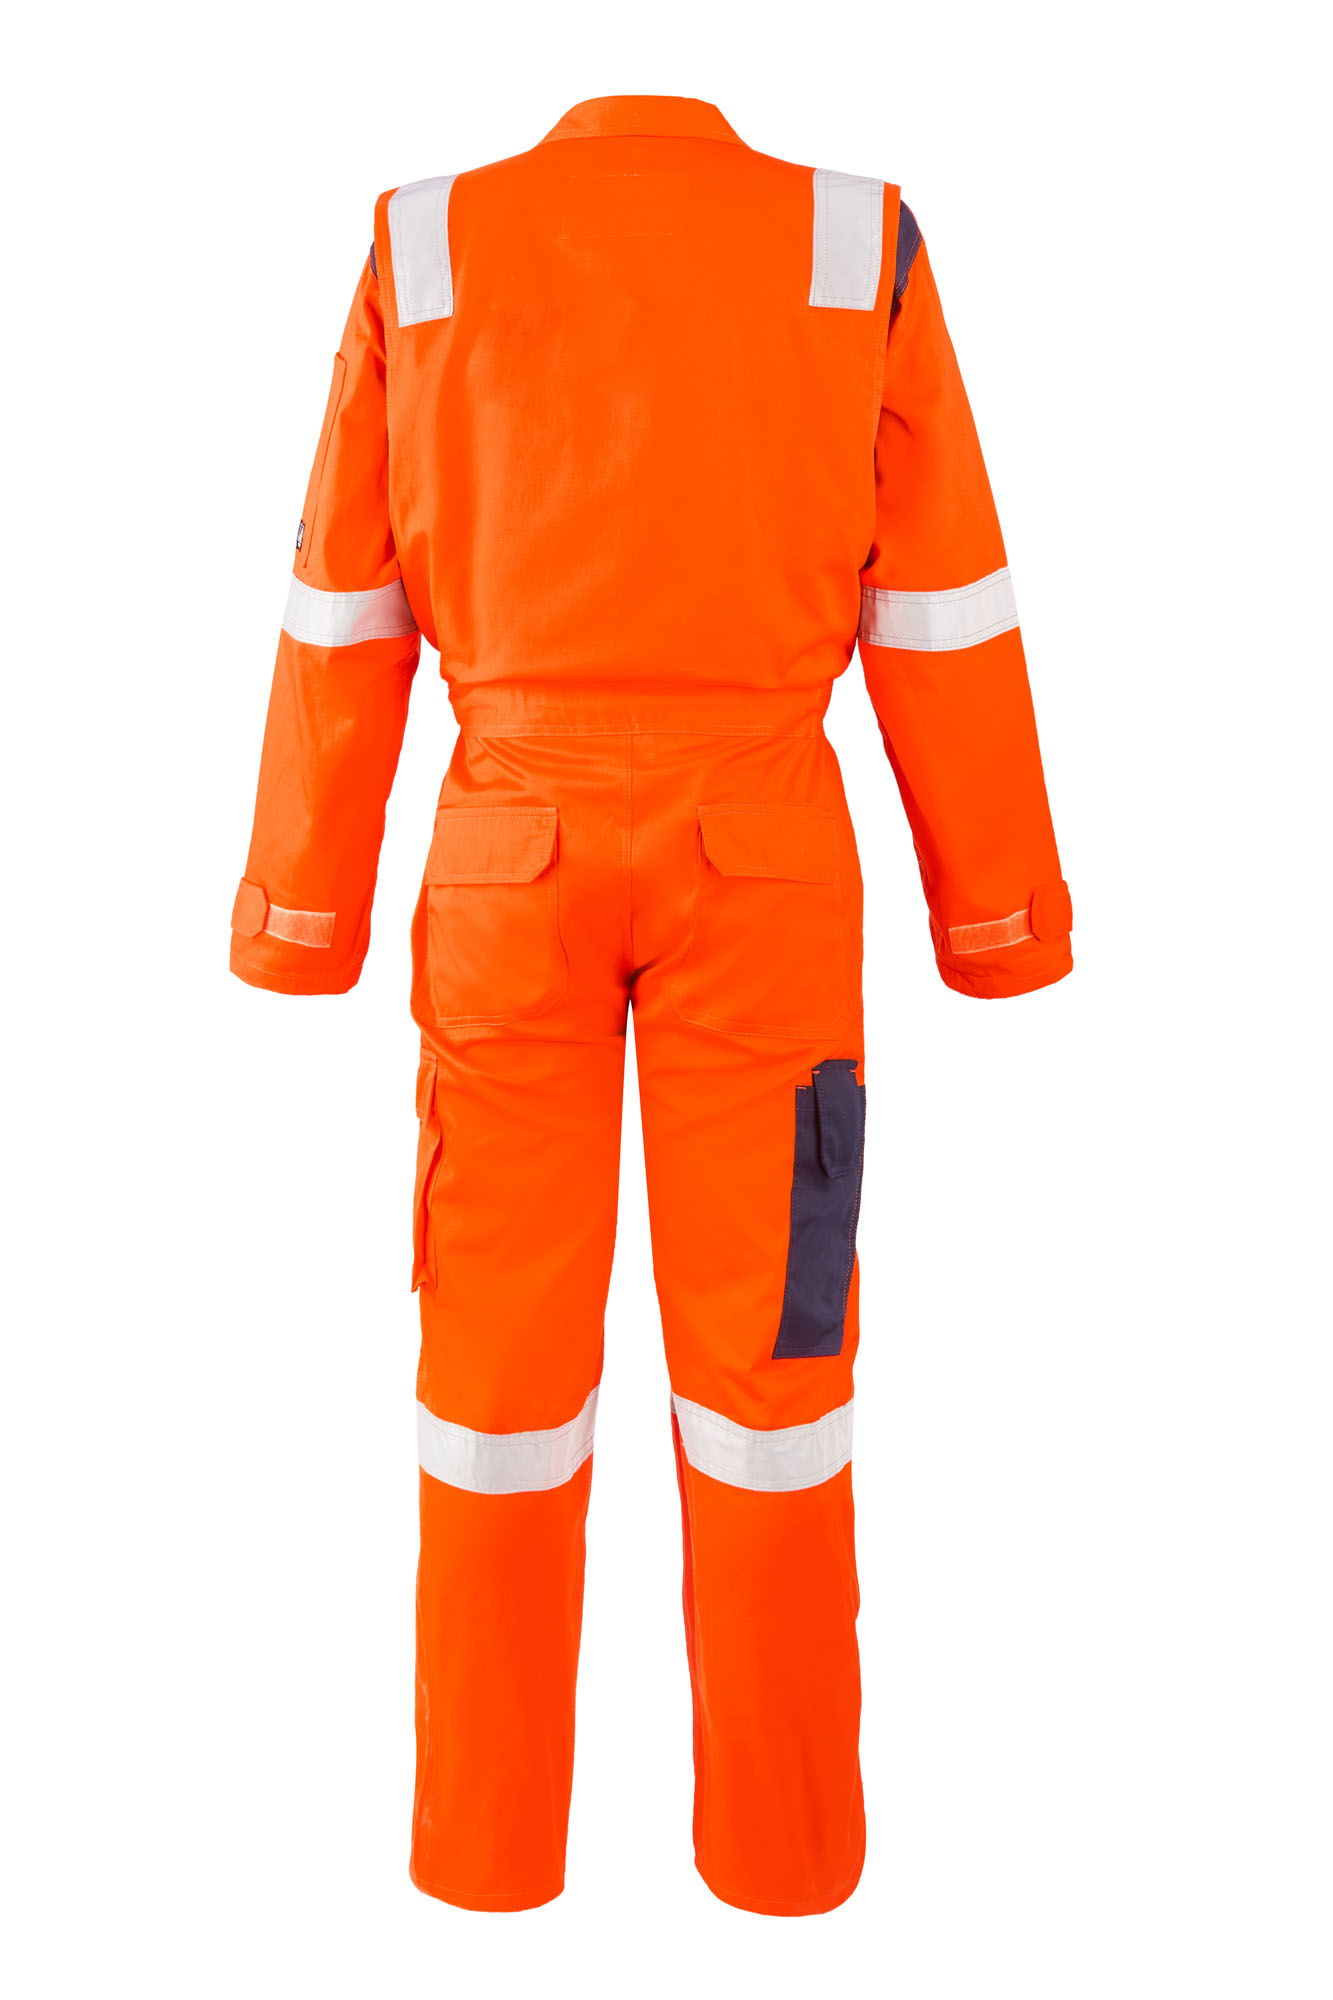 SAMEO Coverall Suit Protective Clothing White Full Body India | Ubuy